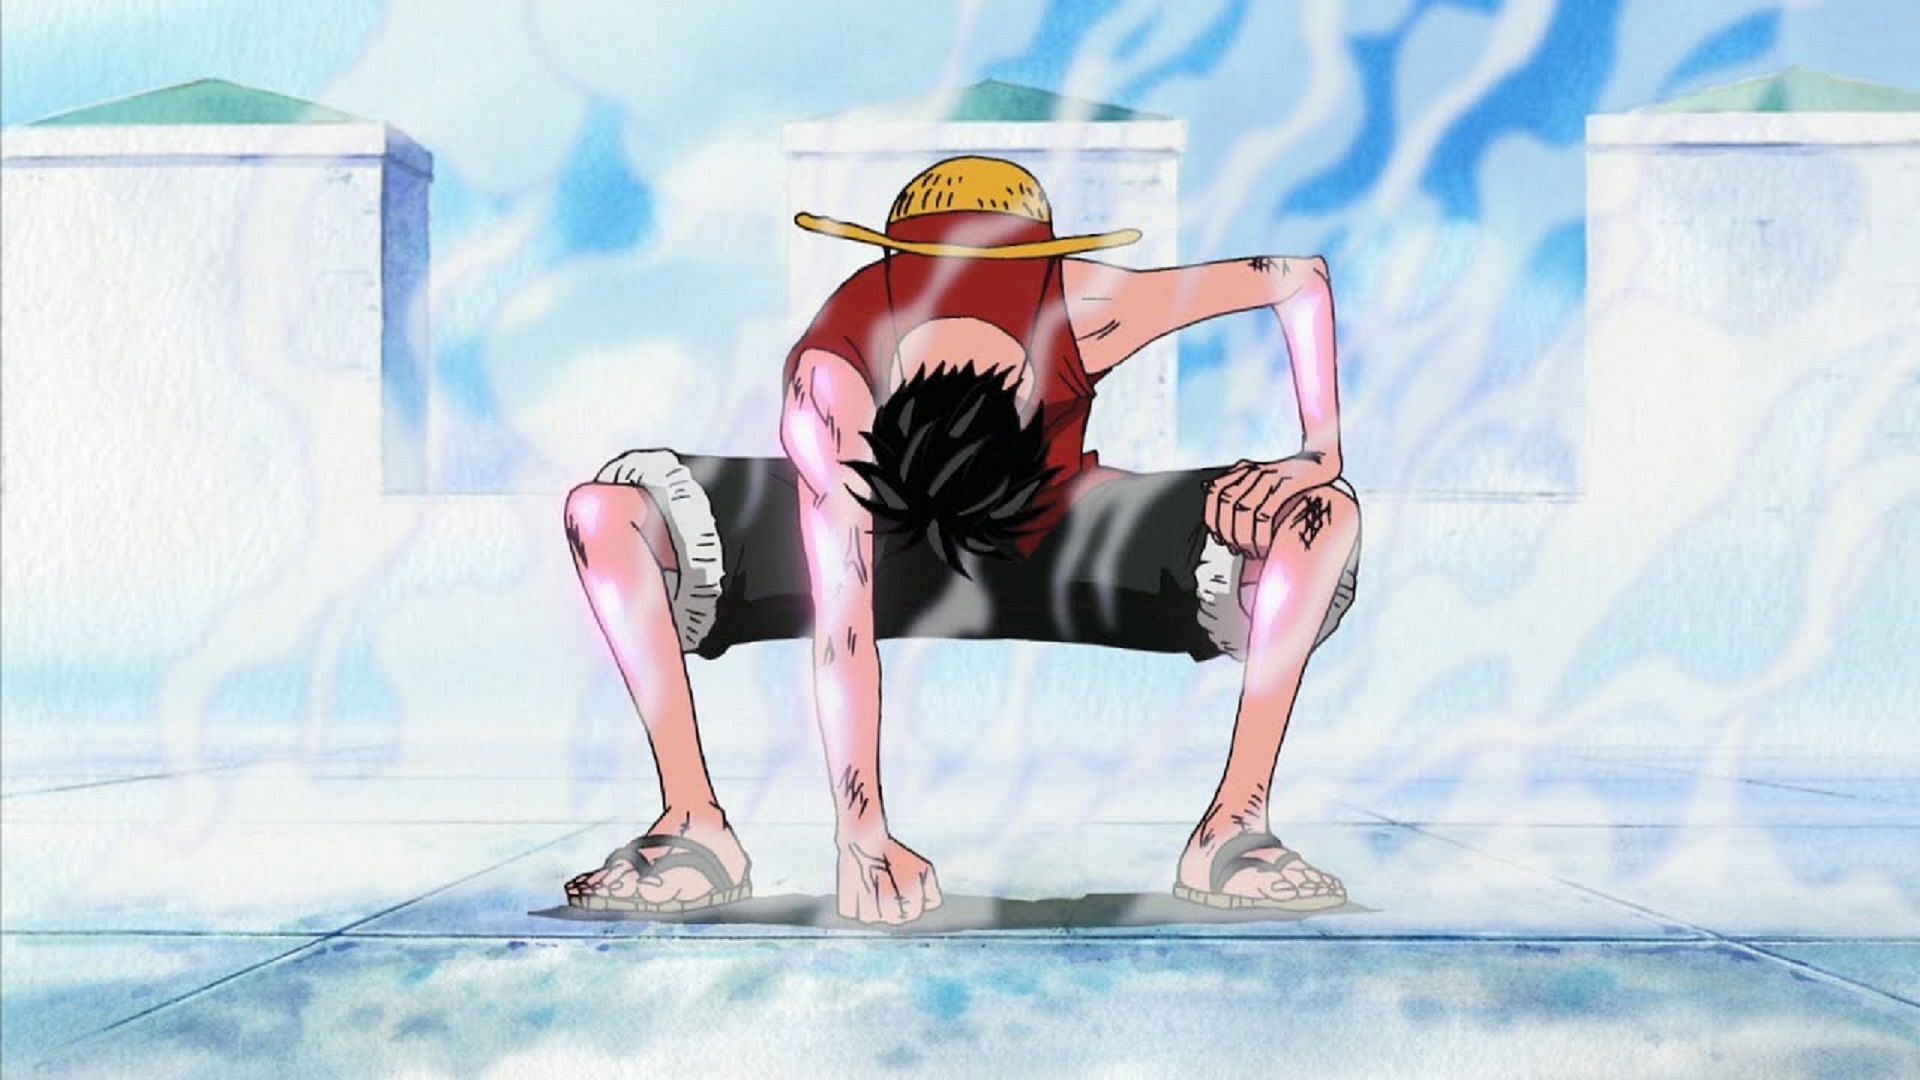 Luffy&#039;s Gear 2 as seen in One Piece (Image via Toei Animation, One Piece)